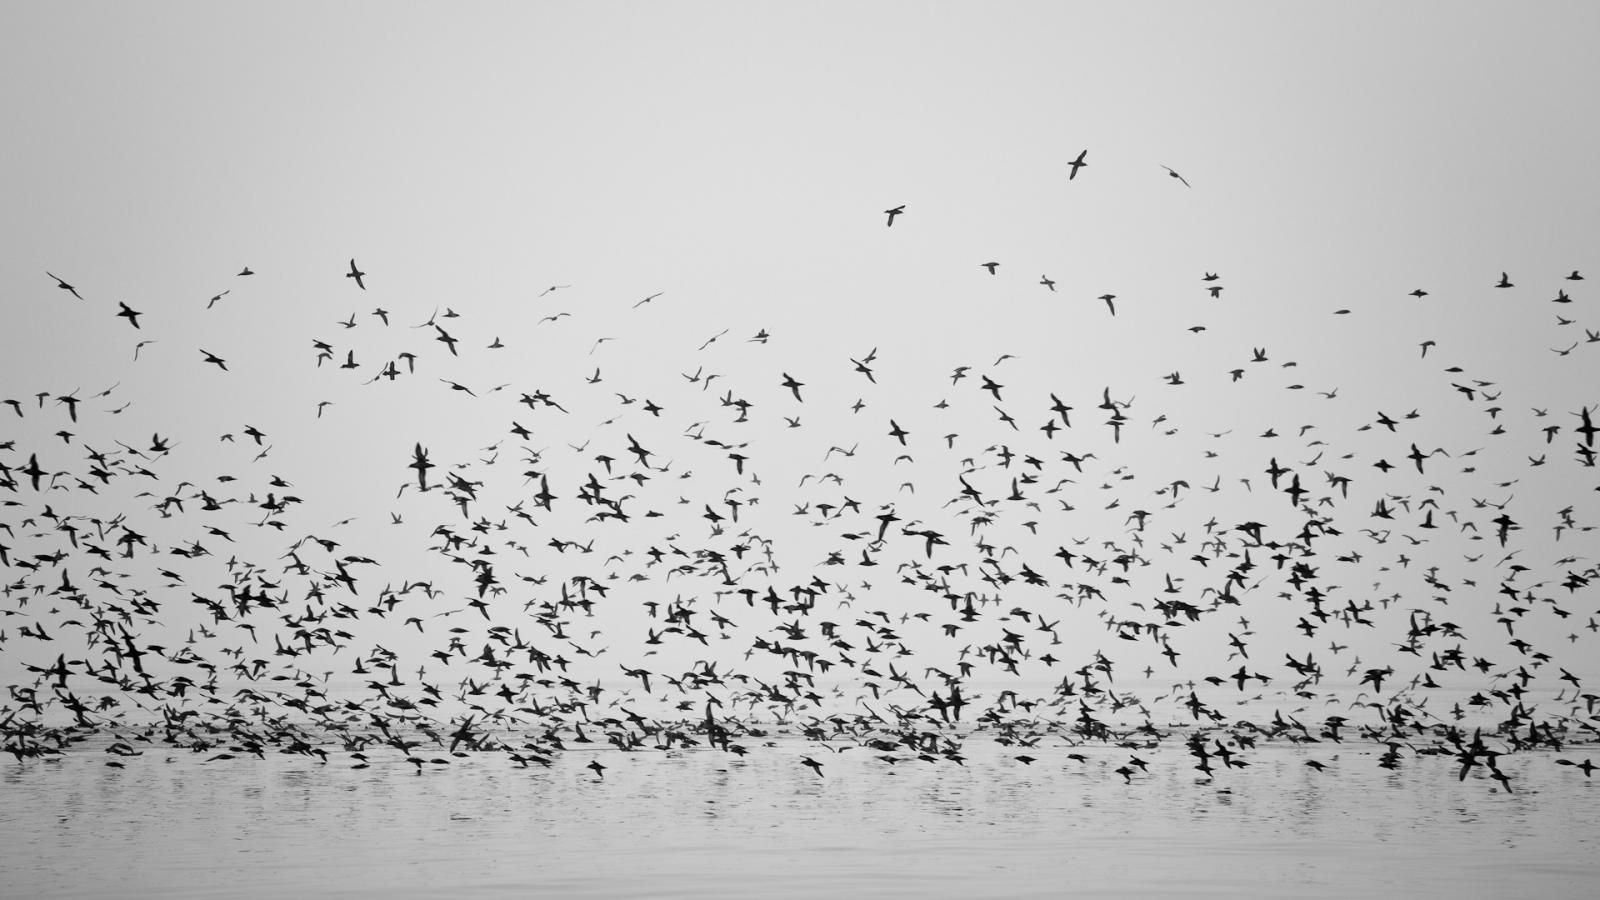 A large flock of birds flying over the water - 